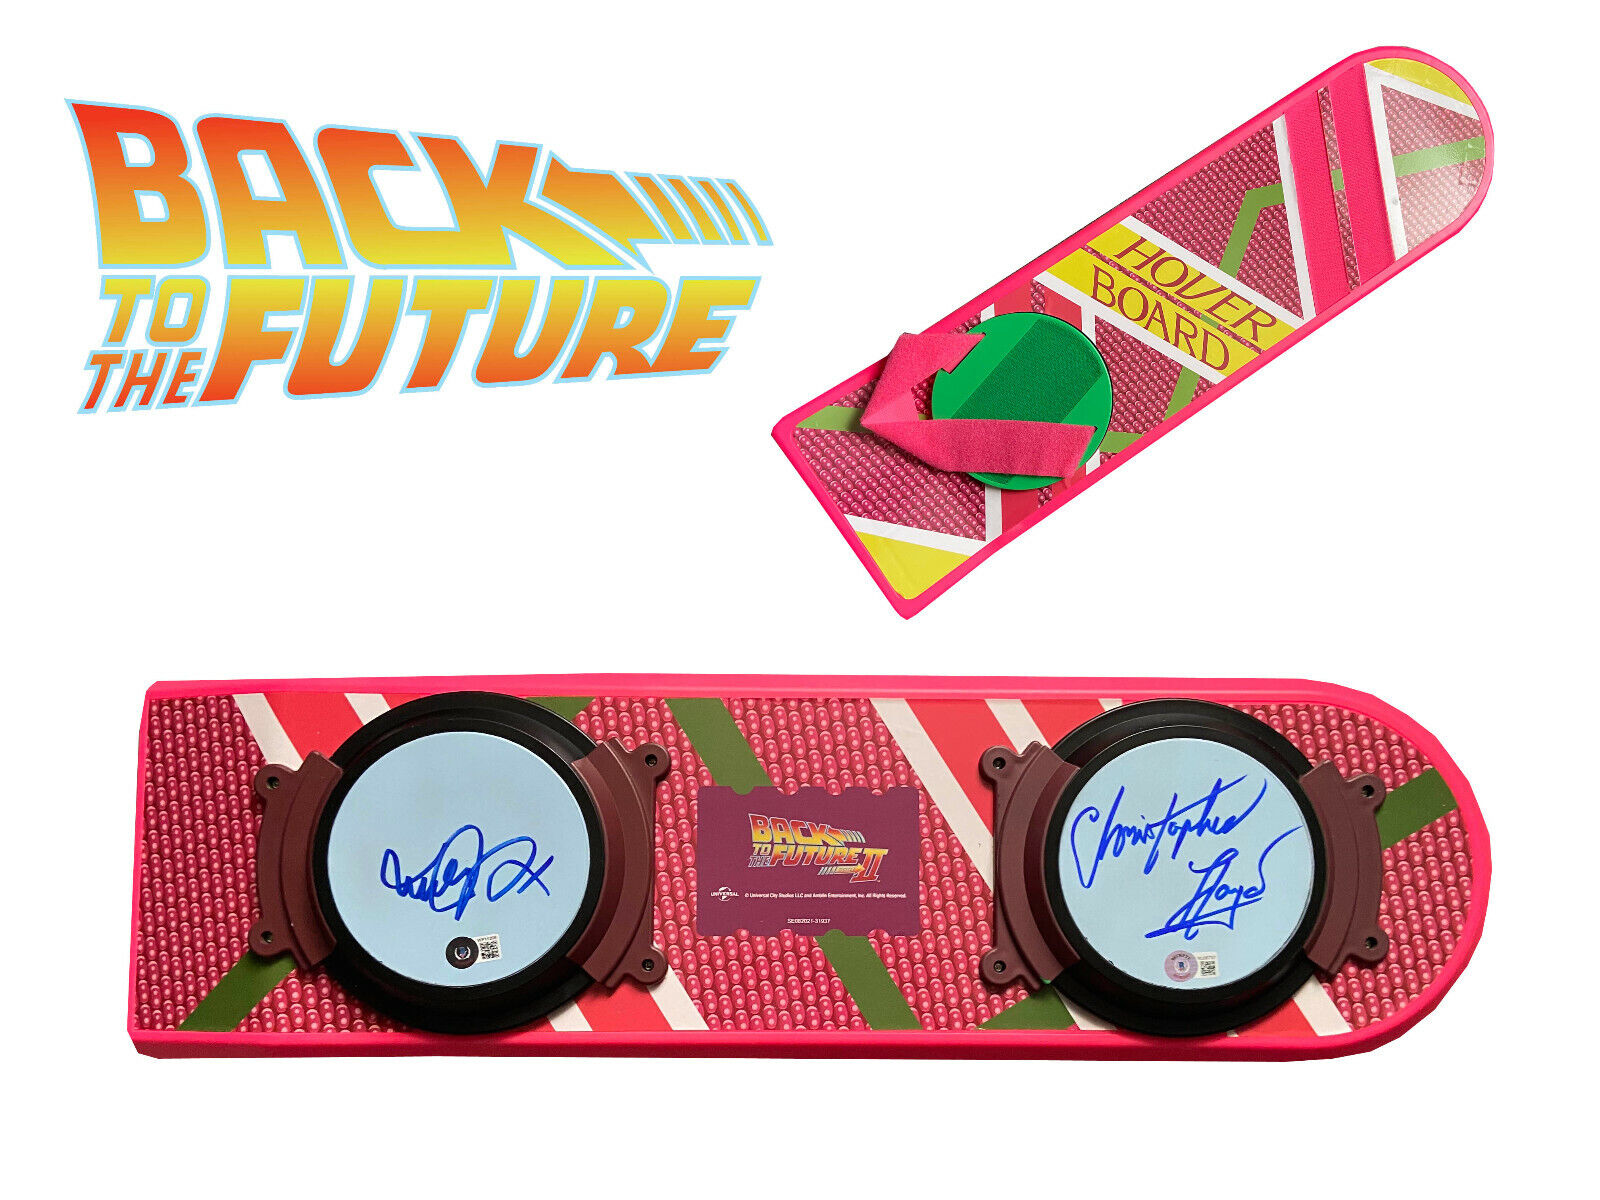 CHRISTOPHER LLOYD MICHAEL J 96％以上節約 FOX SIGNED TO BECKETT BACK THE 12月スーパーSALE HOVERBOARD FUTURE